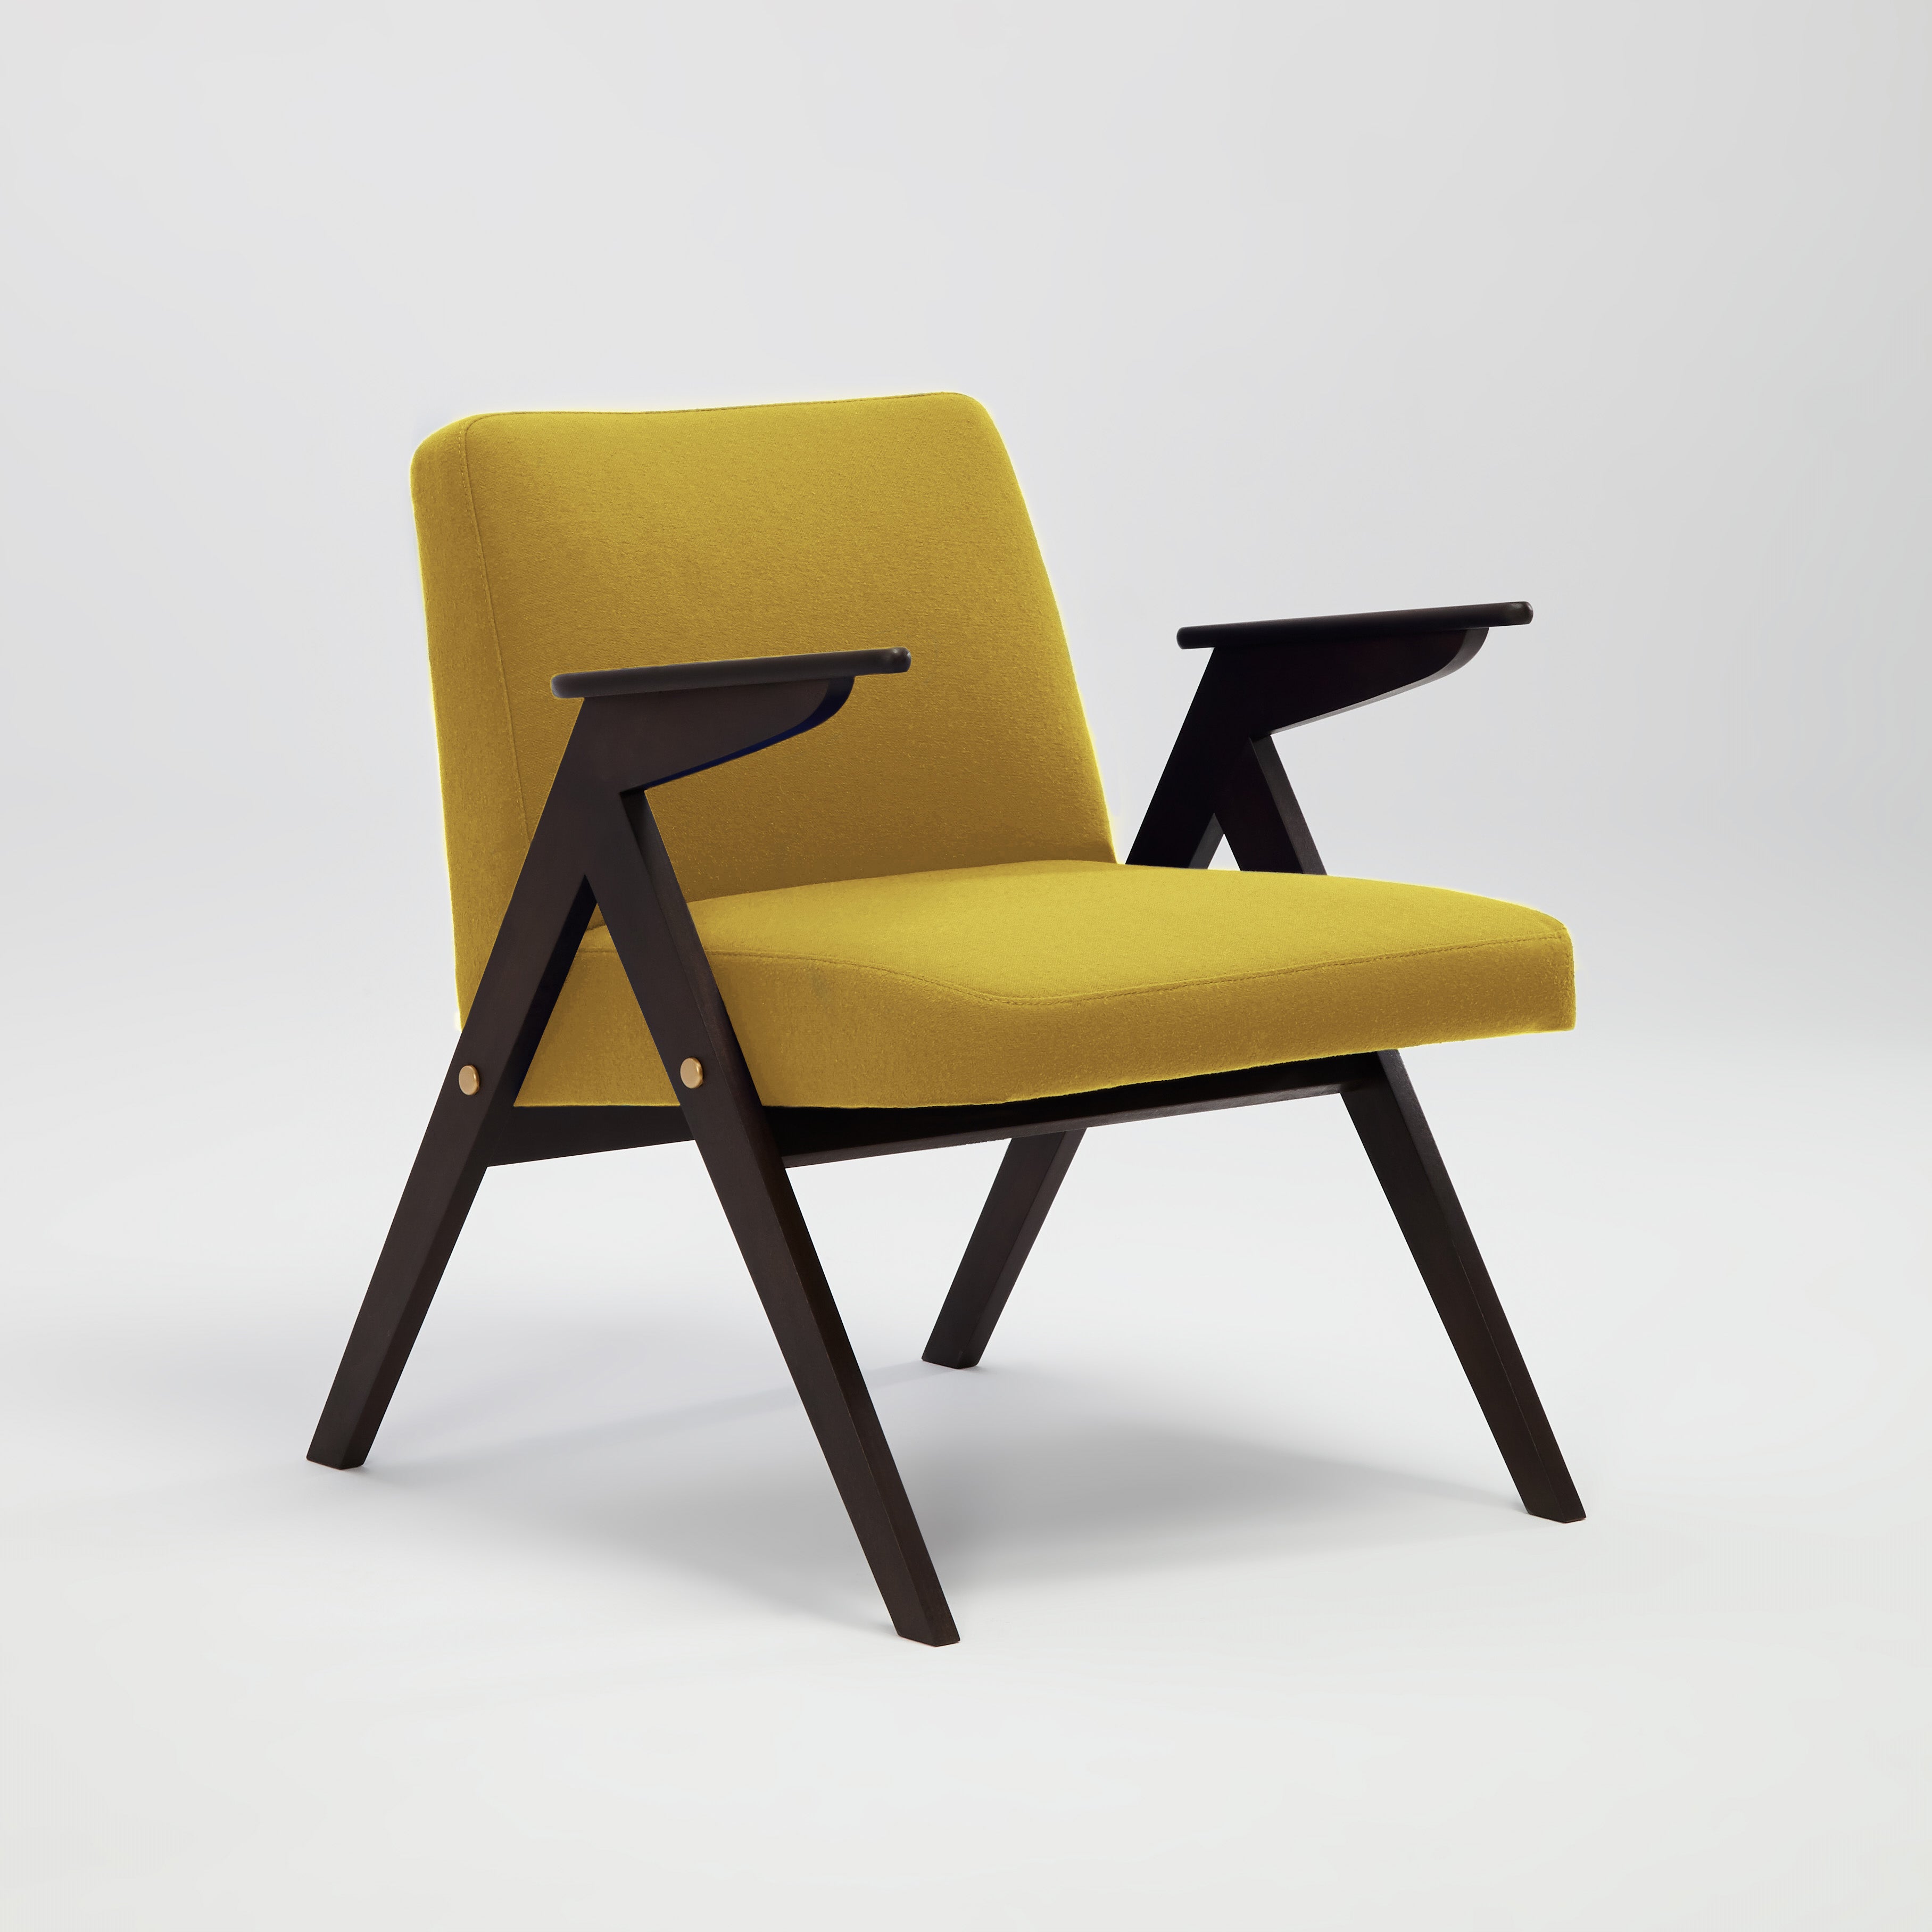 JUNCO Chair black beech wood upholstery colour yellow